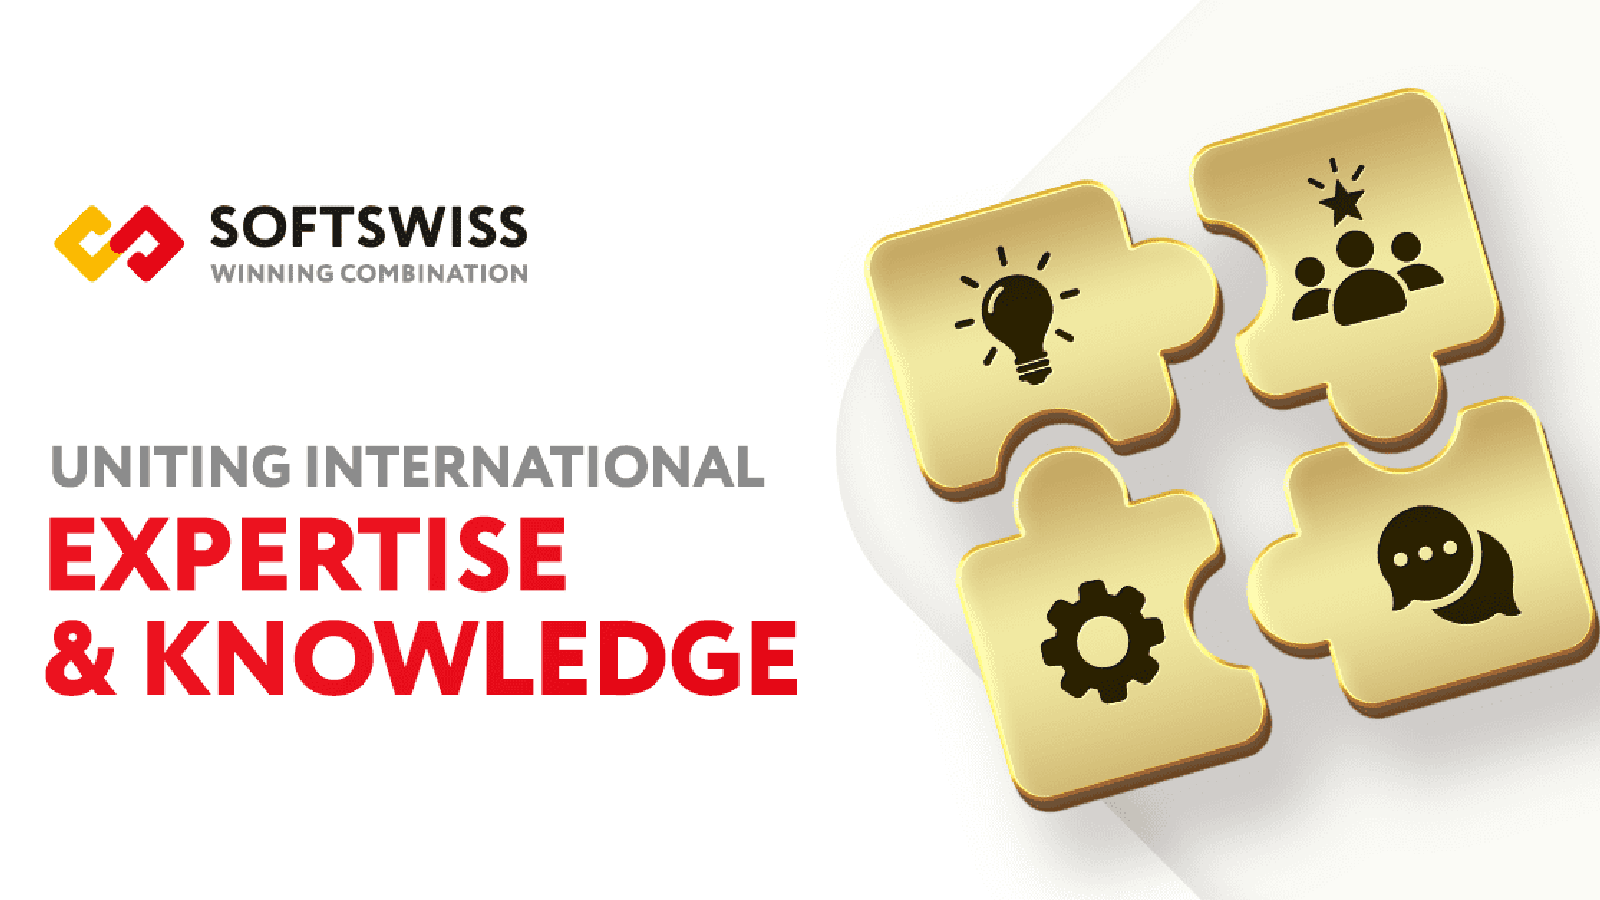 iGaming Trends: SOFTSWISS Wertefest